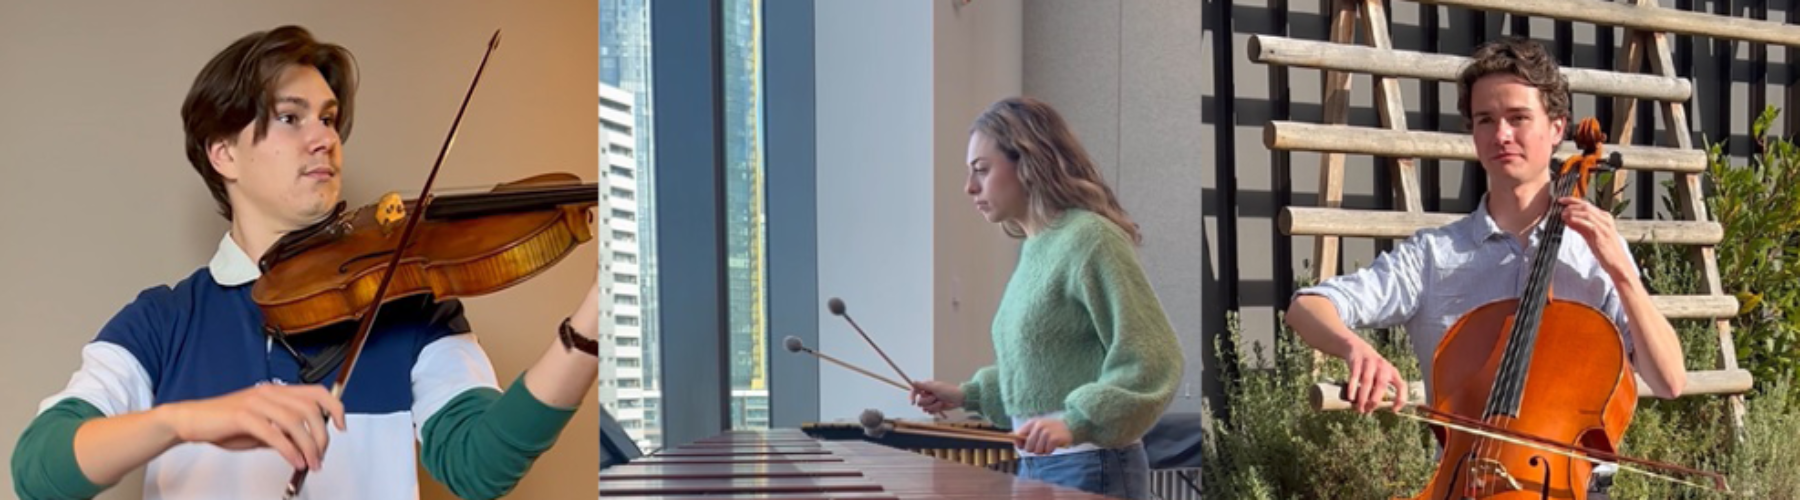 Three photos of young musicians playing their instruments edited side-by-side.